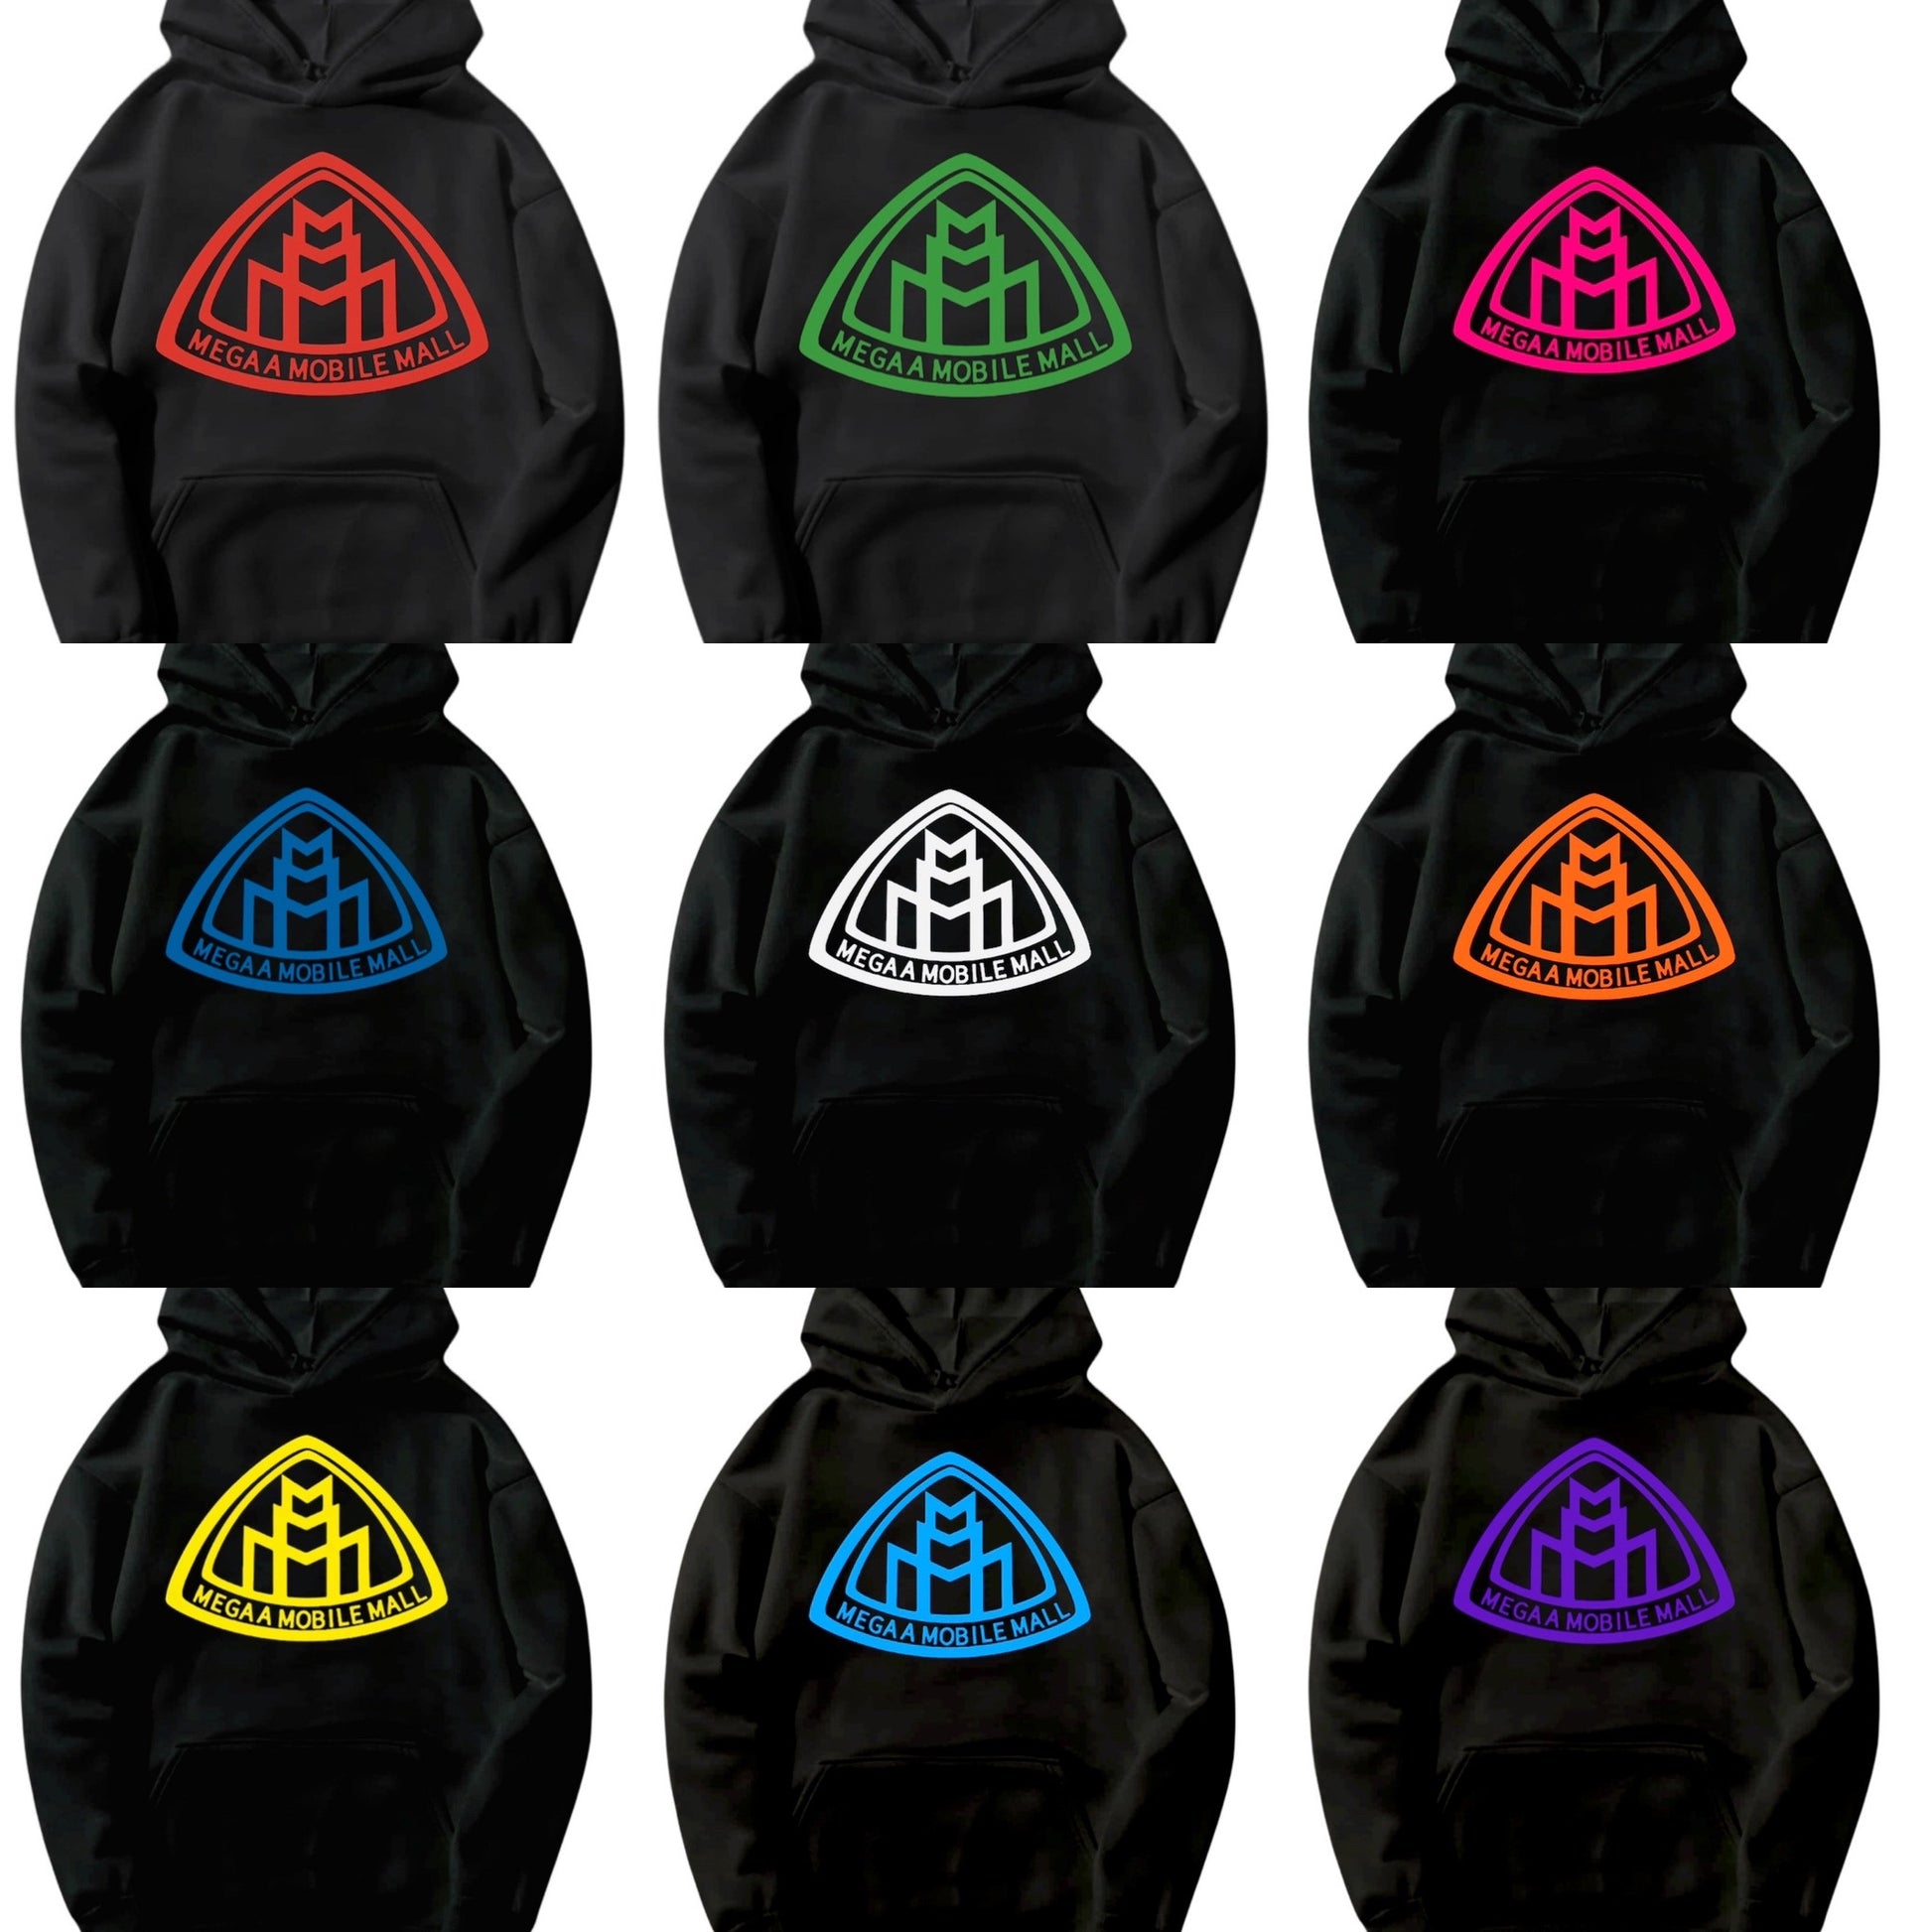 black megaamobilemall logo Heavy Blend Fleece Hoodie with 9 different logo color options